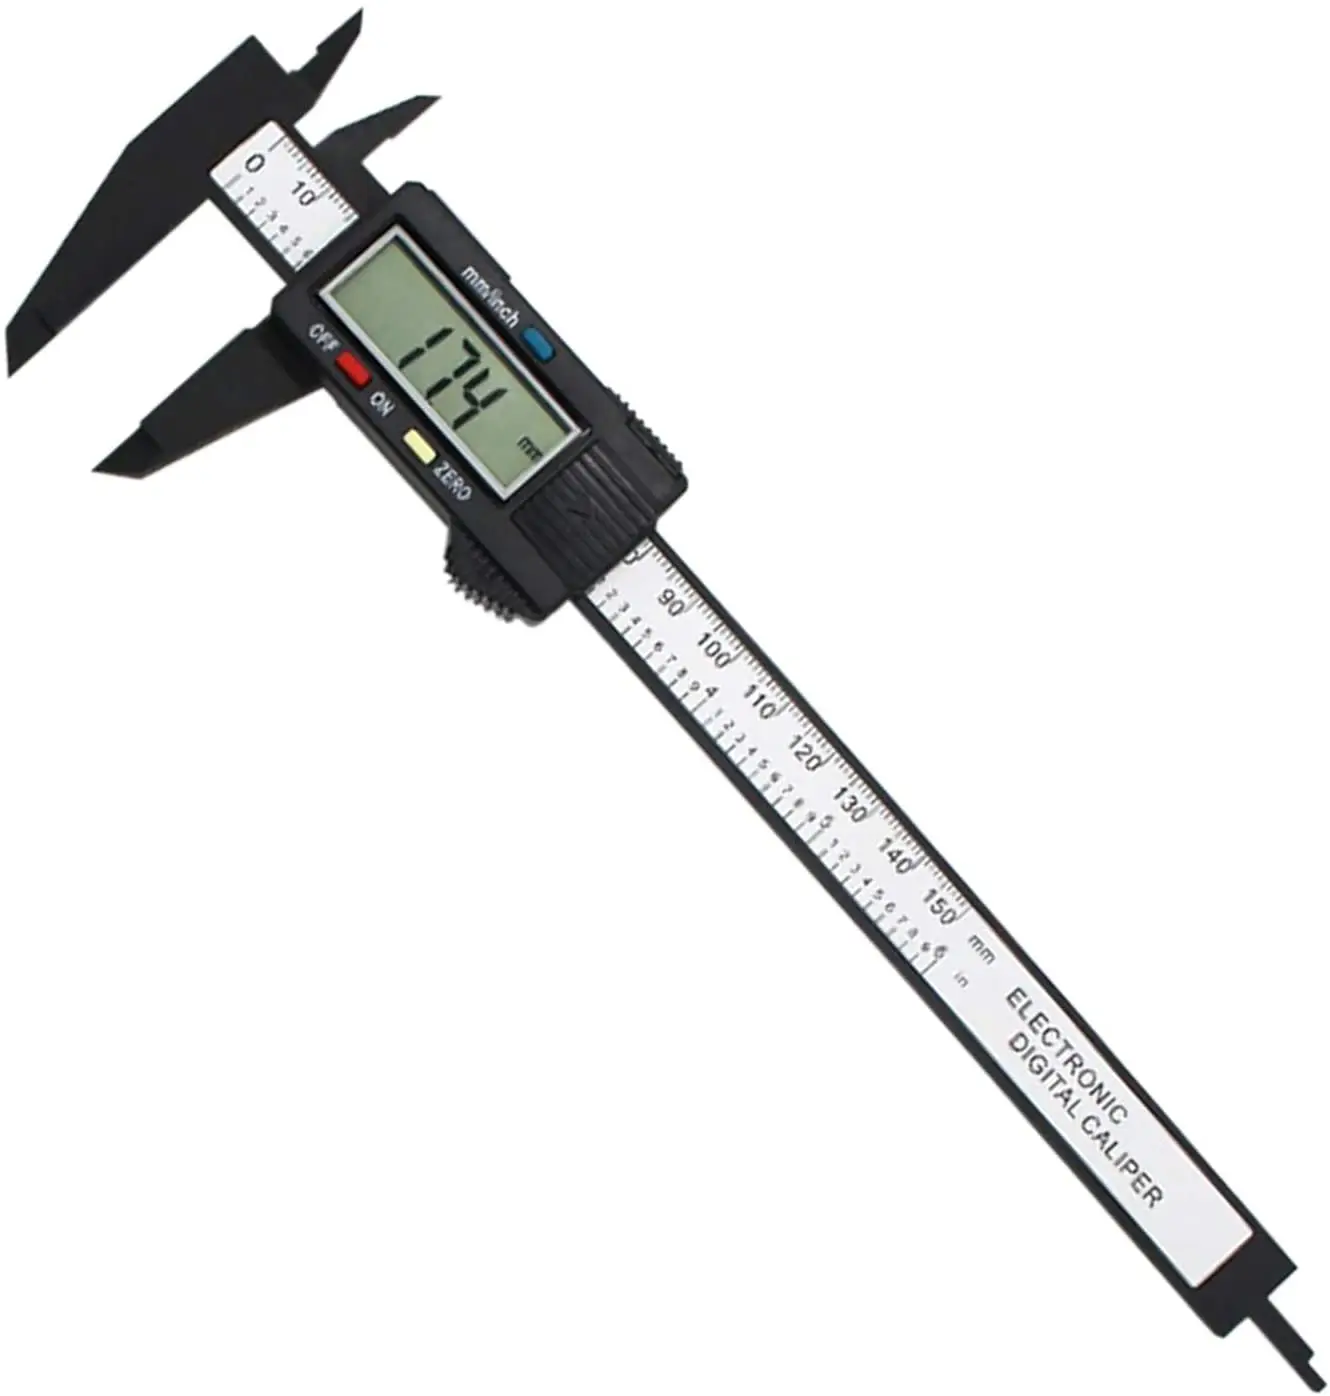 Details about   150mm 0-6 inch Electronic Digital Caliper w/LCD Screen Micrometer Measuring Tool 